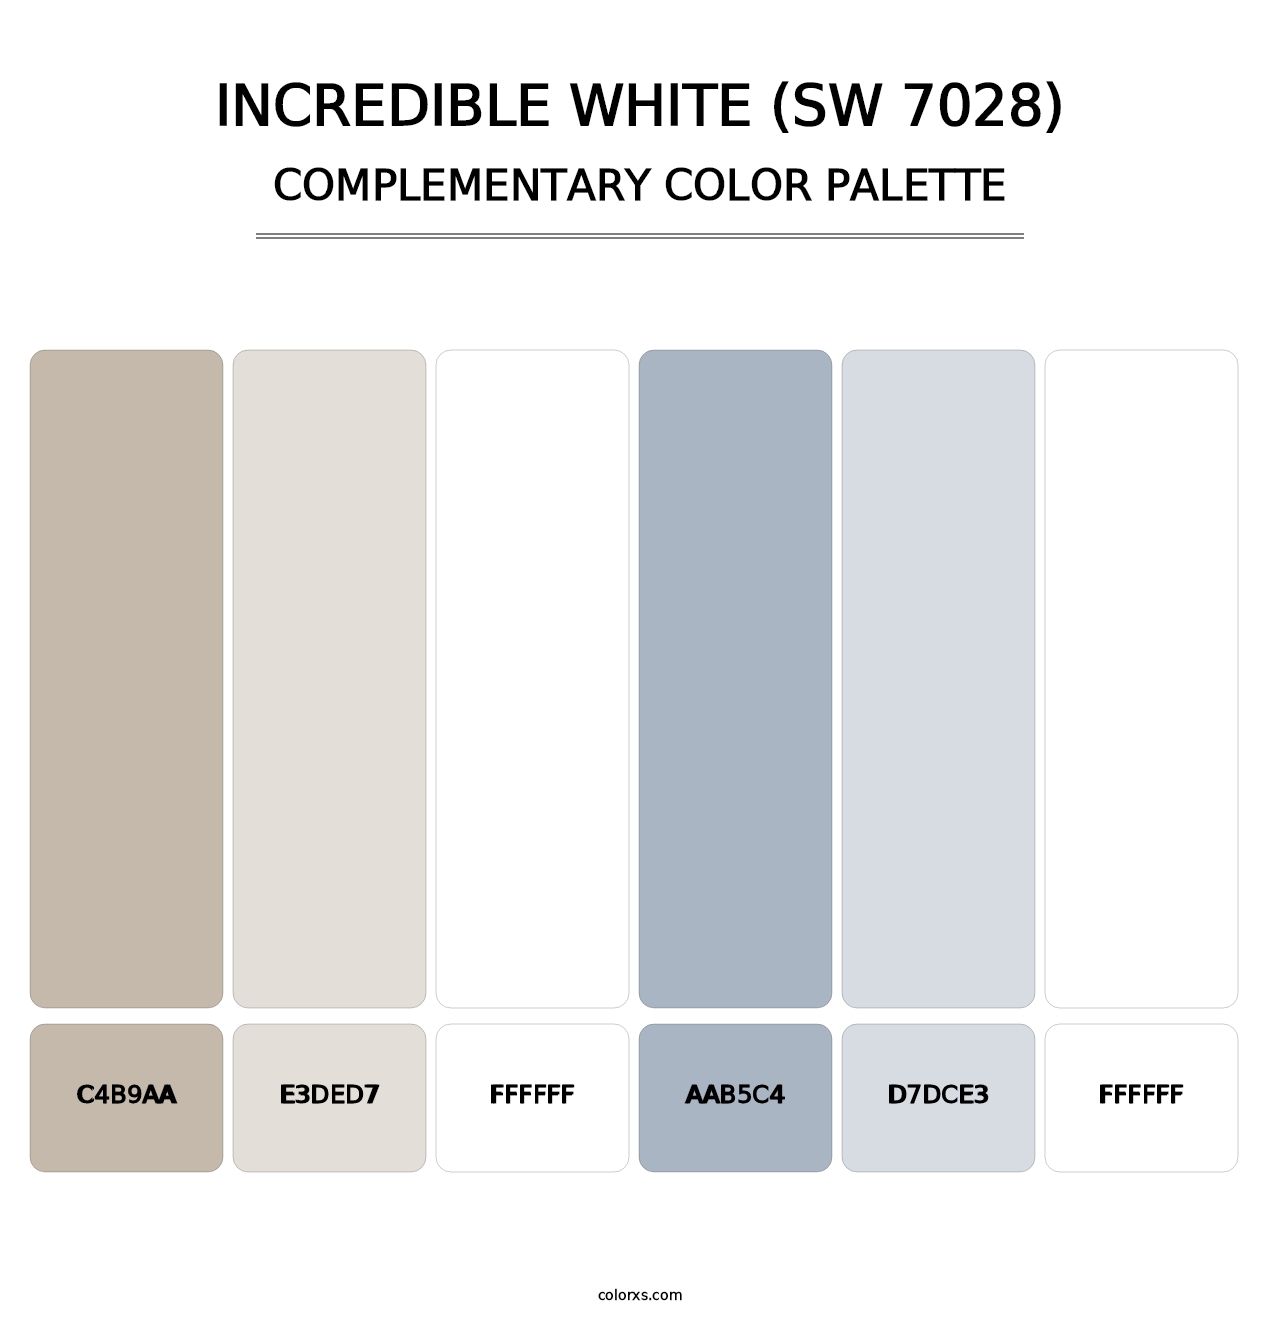 Incredible White (SW 7028) - Complementary Color Palette